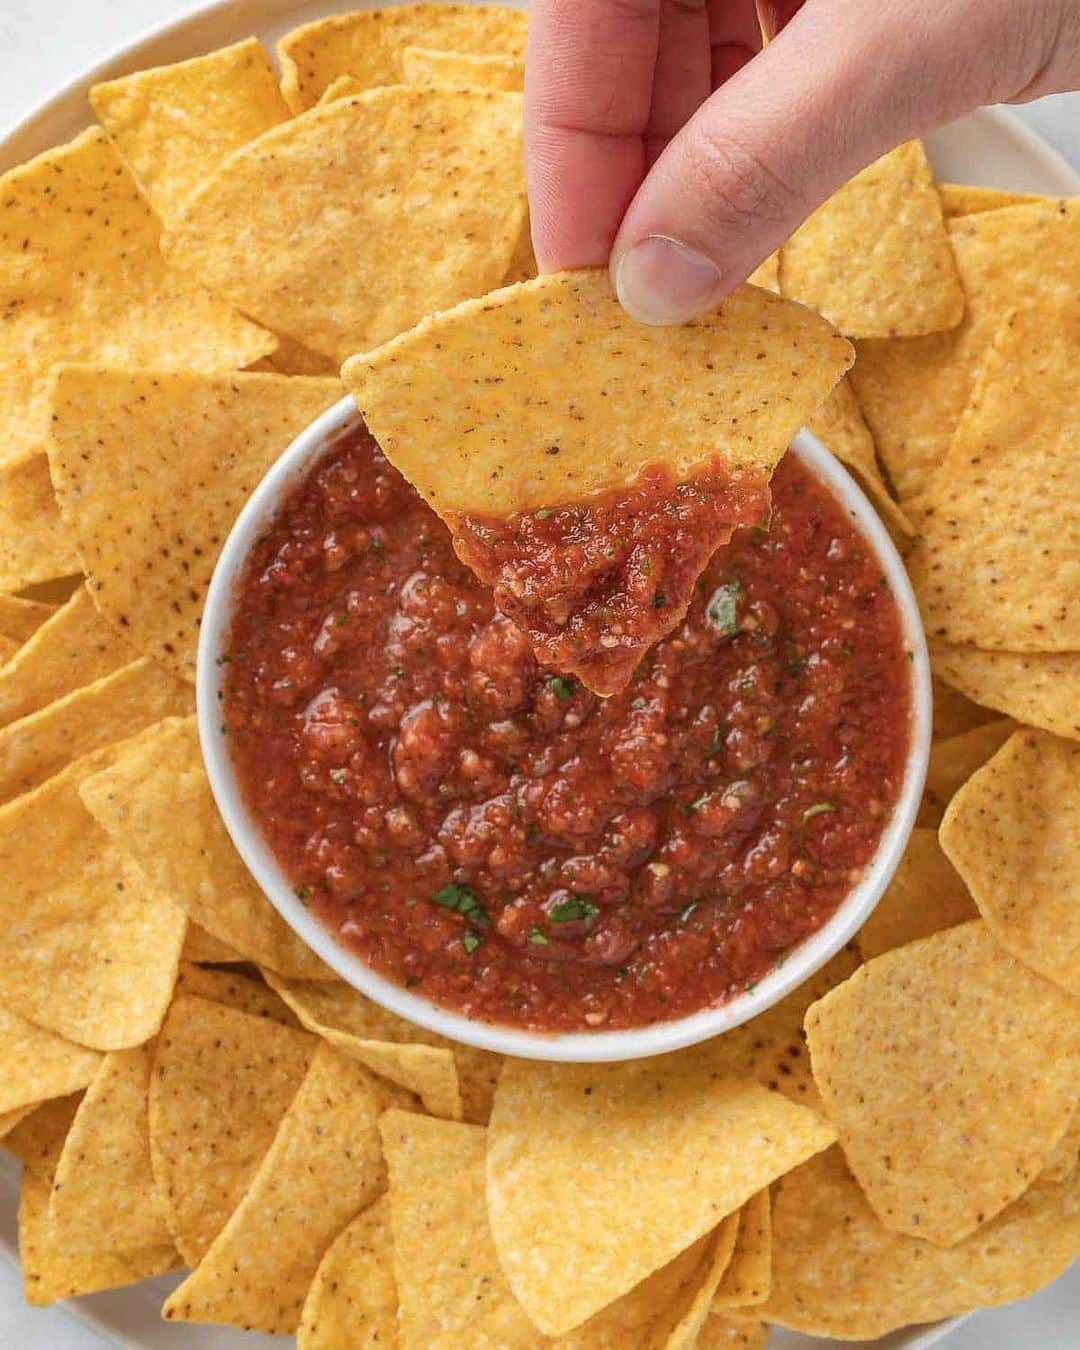 Easy Recipesのインスタグラム：「This Homemade Salsa comes together in minutes and is so healthy, fresh, and full of flavor! This restaurant style salsa is perfect to serve with tortilla chips or as a topping for other recipes.  Full recipe link in my bio @cookinwithmima  https://www.cookinwithmima.com/salsa-recipe-with-jalapeno/」